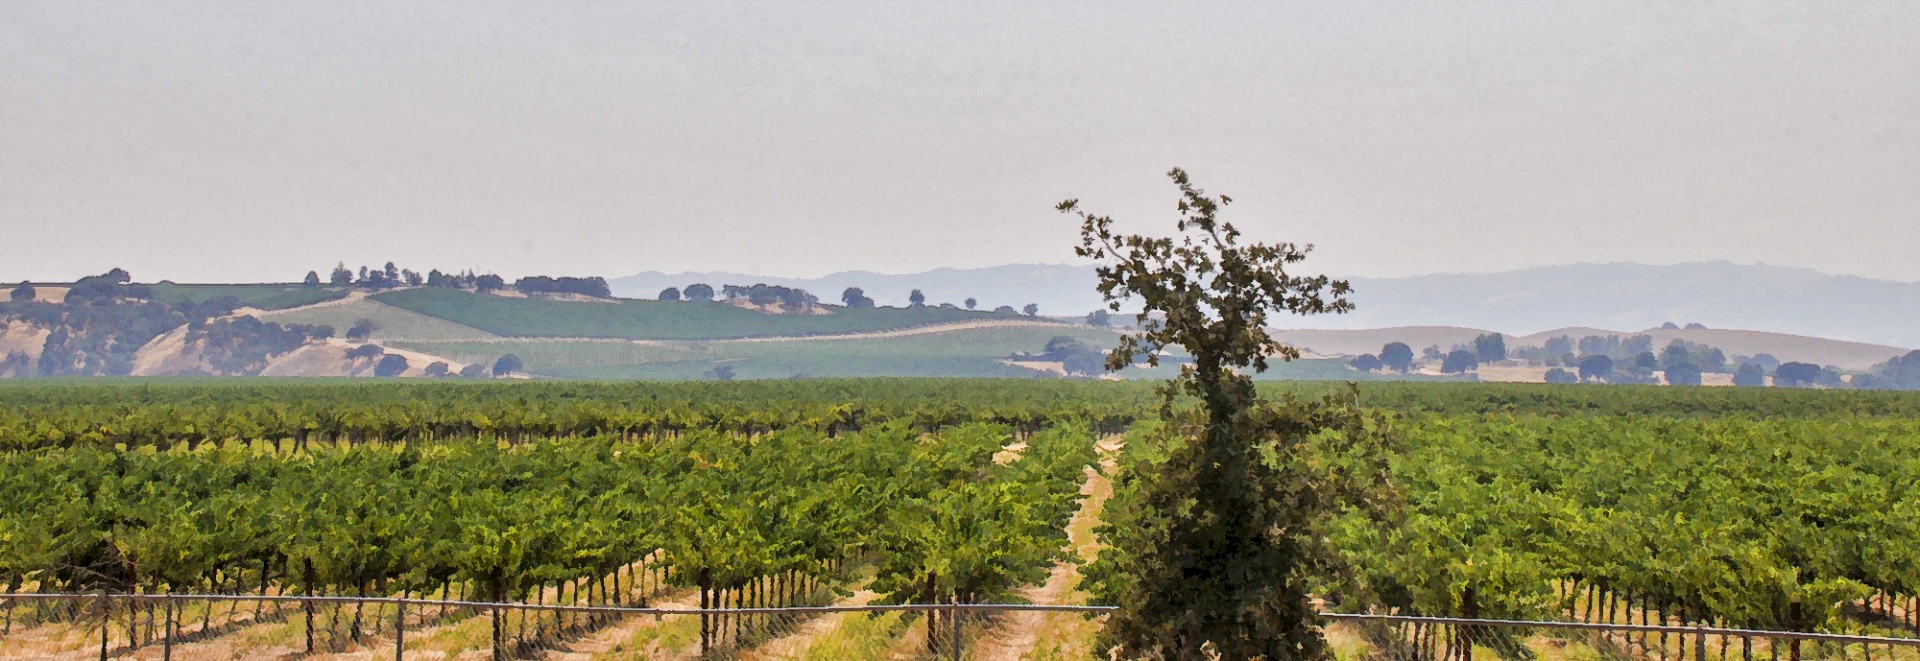 vertical web banner of landscape photo of the wine country